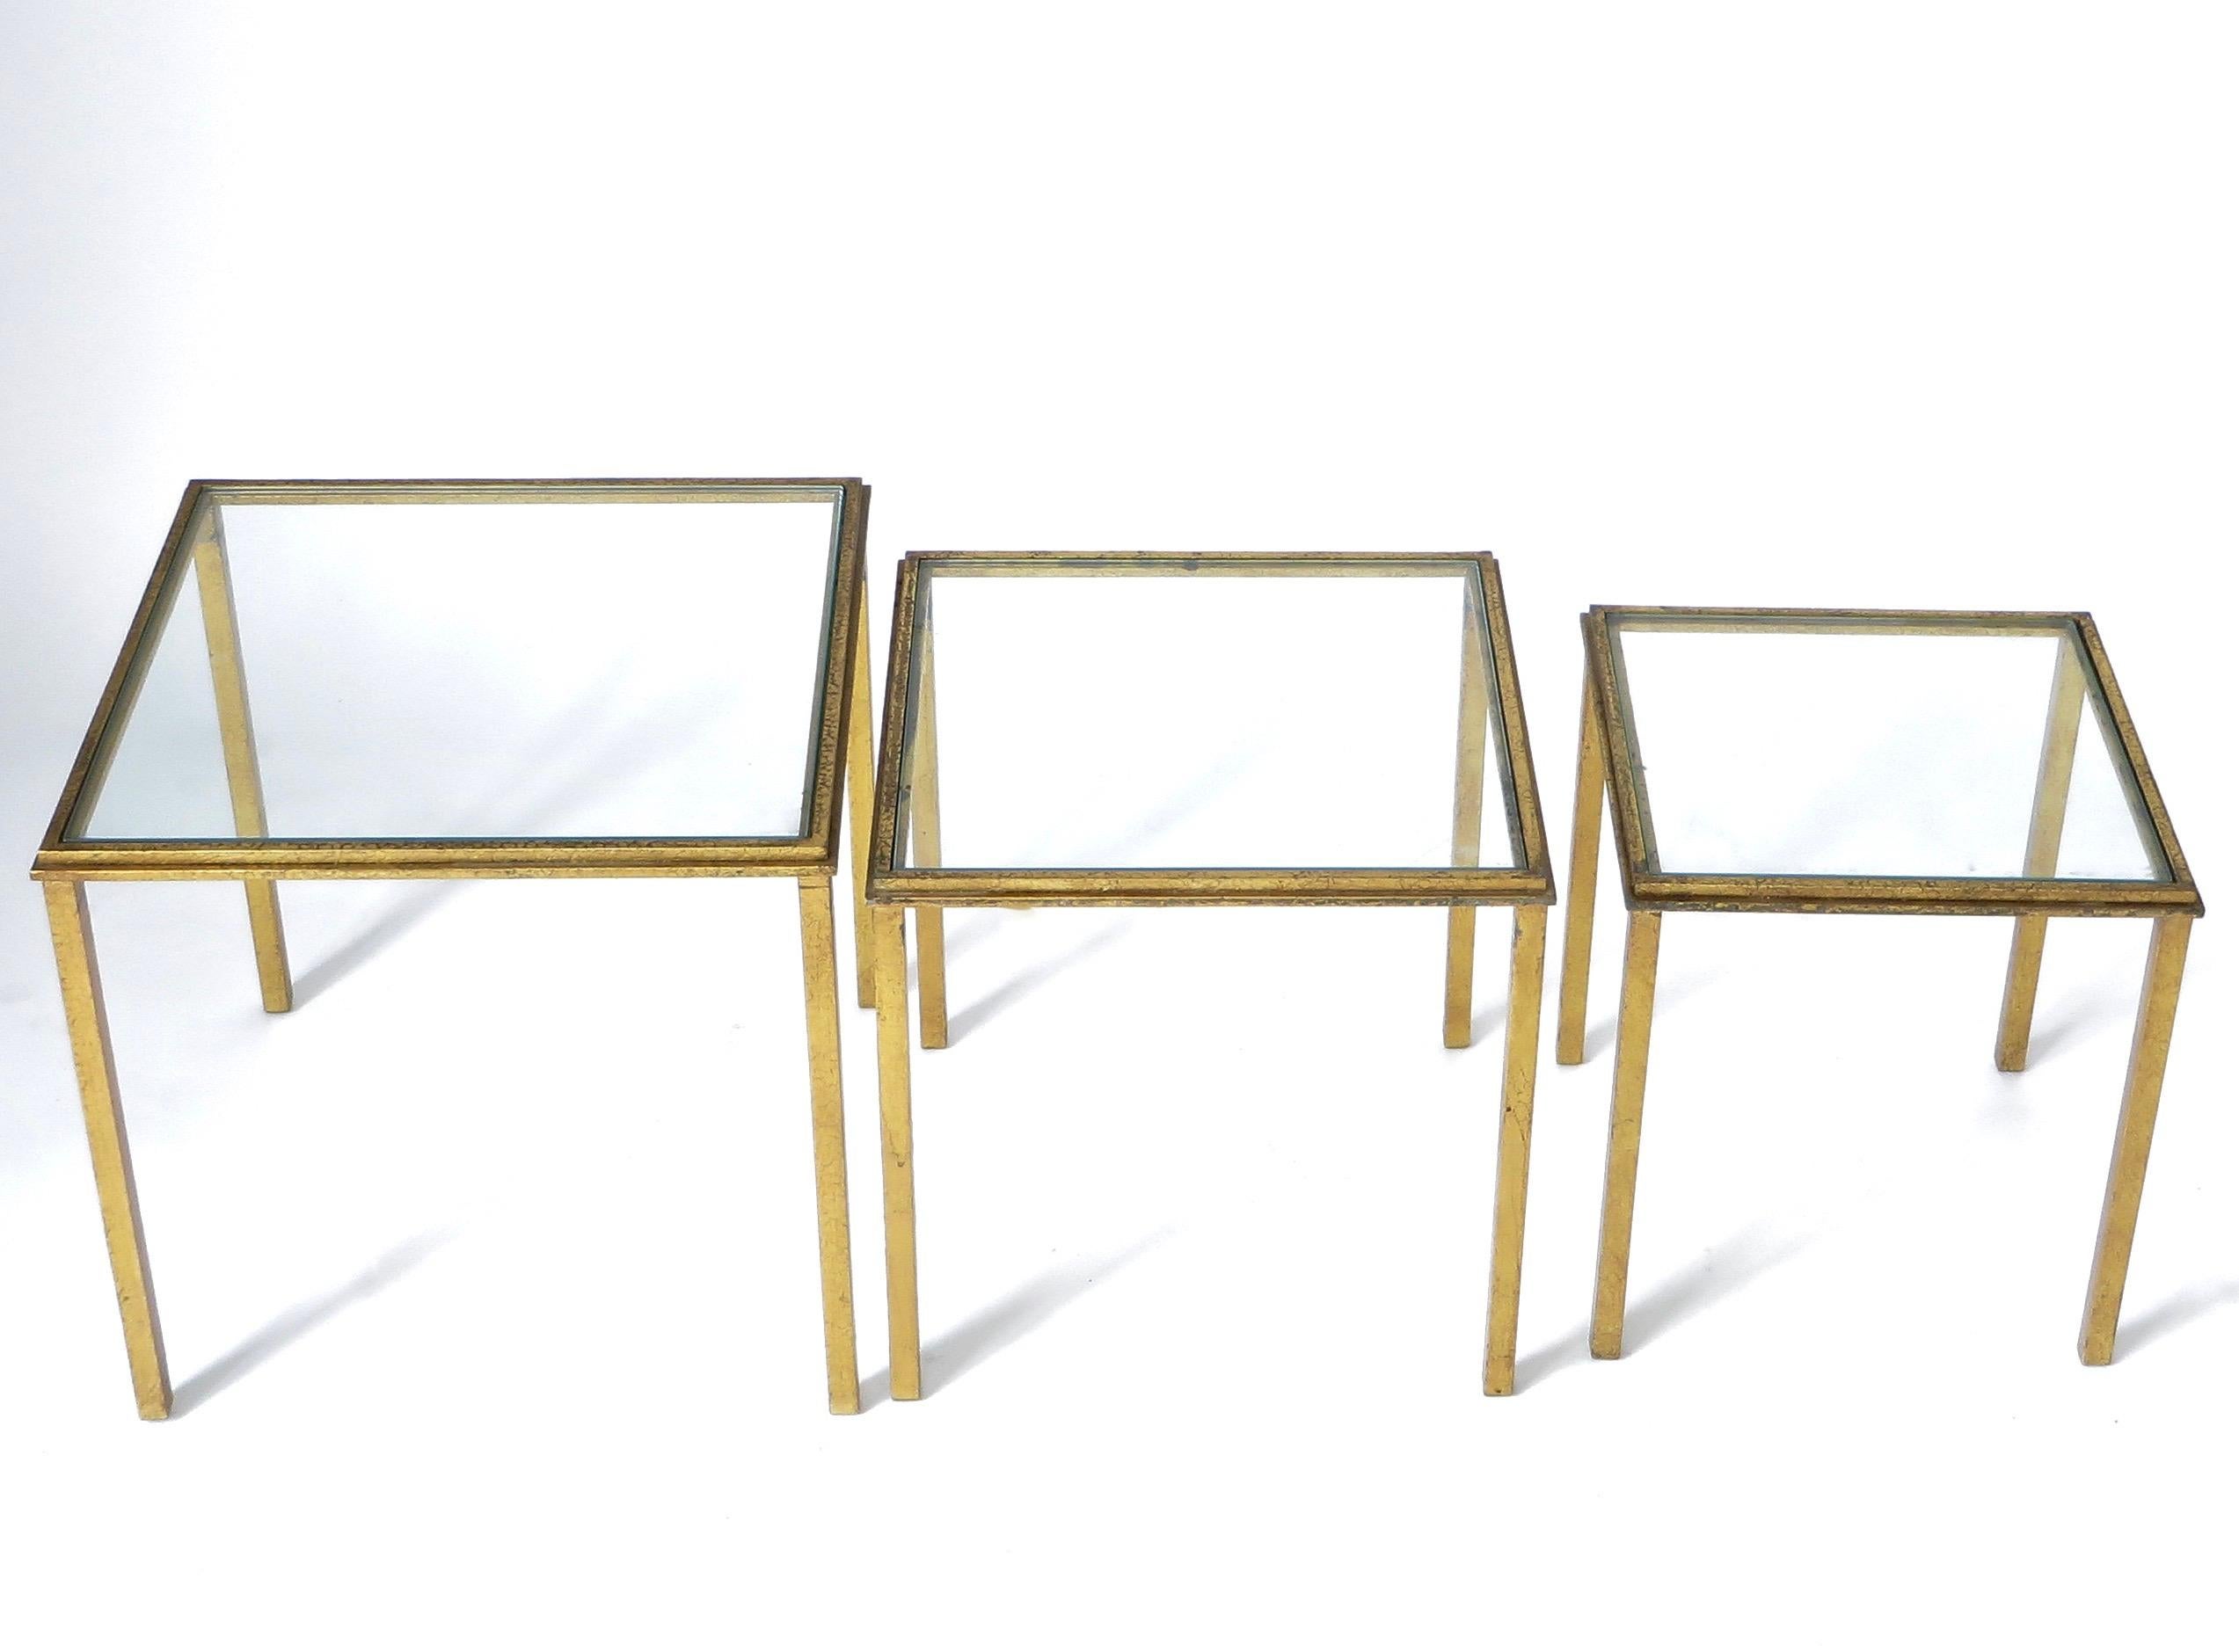 Glass French Gilded Iron Nesting Tables by Roger Thibier circa 1960 Set of Three For Sale